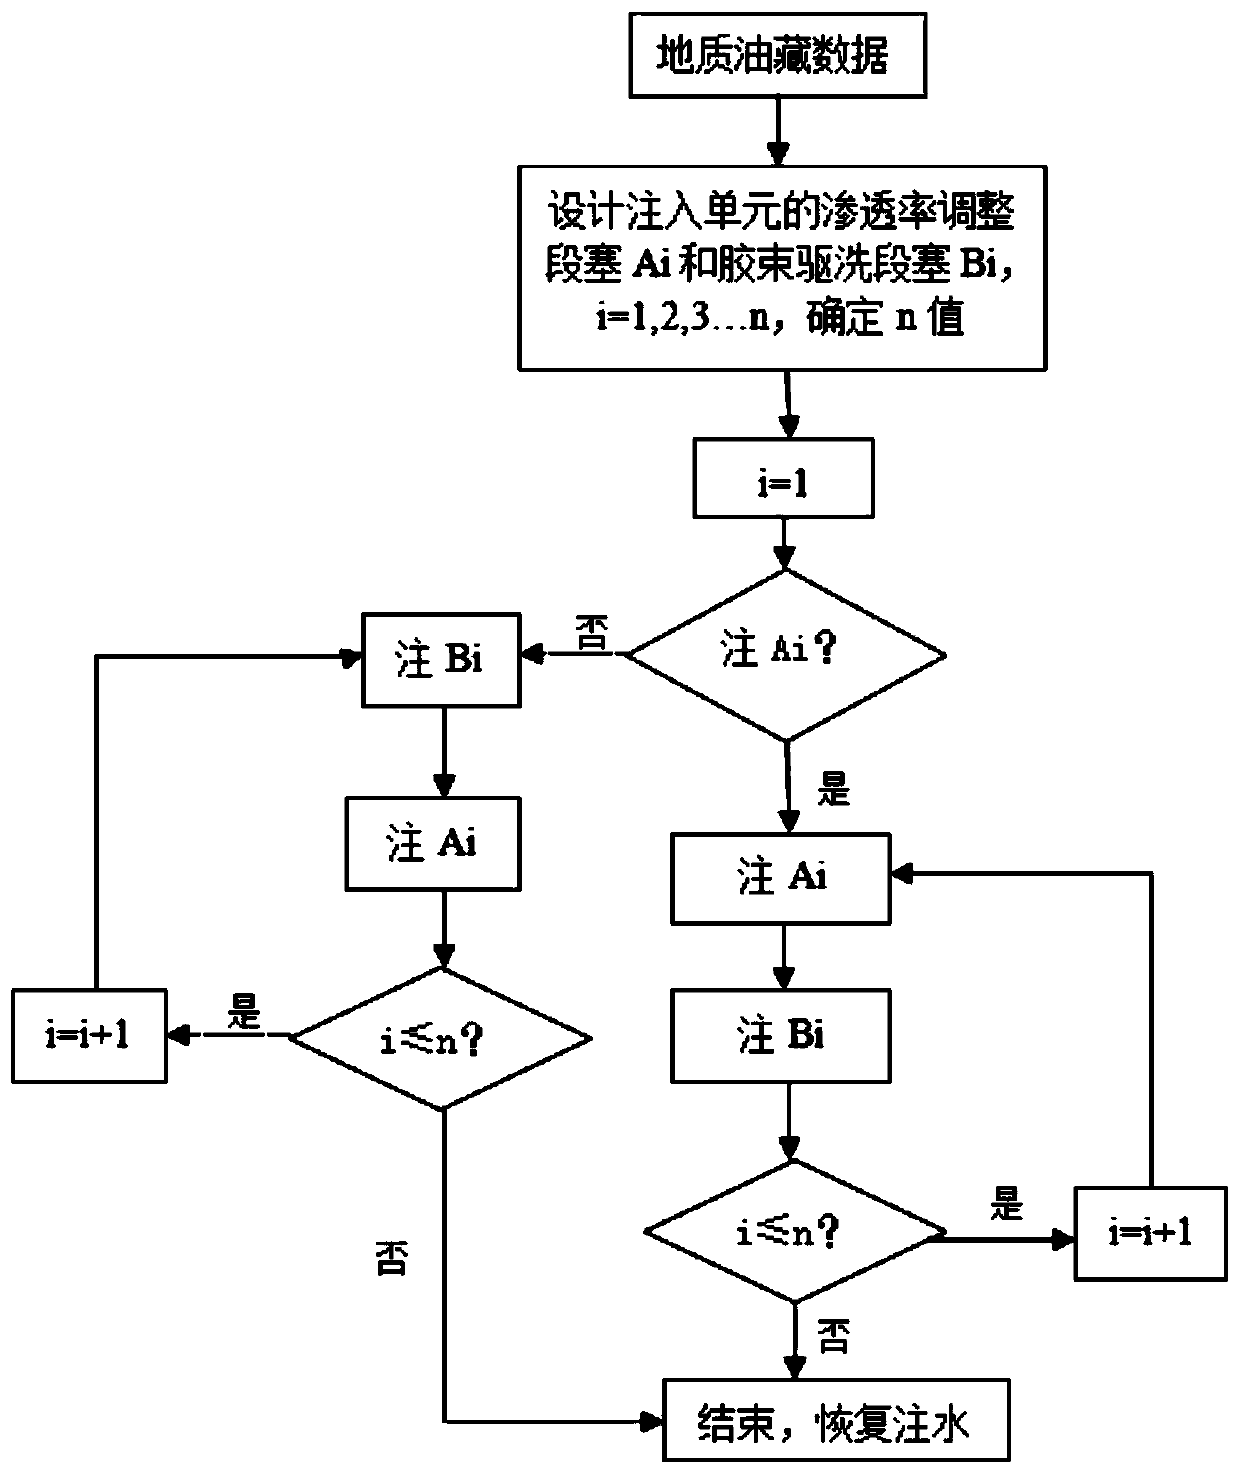 Method for increasing crude oil recovery ratio through modifying, flooding and washing alternate injection